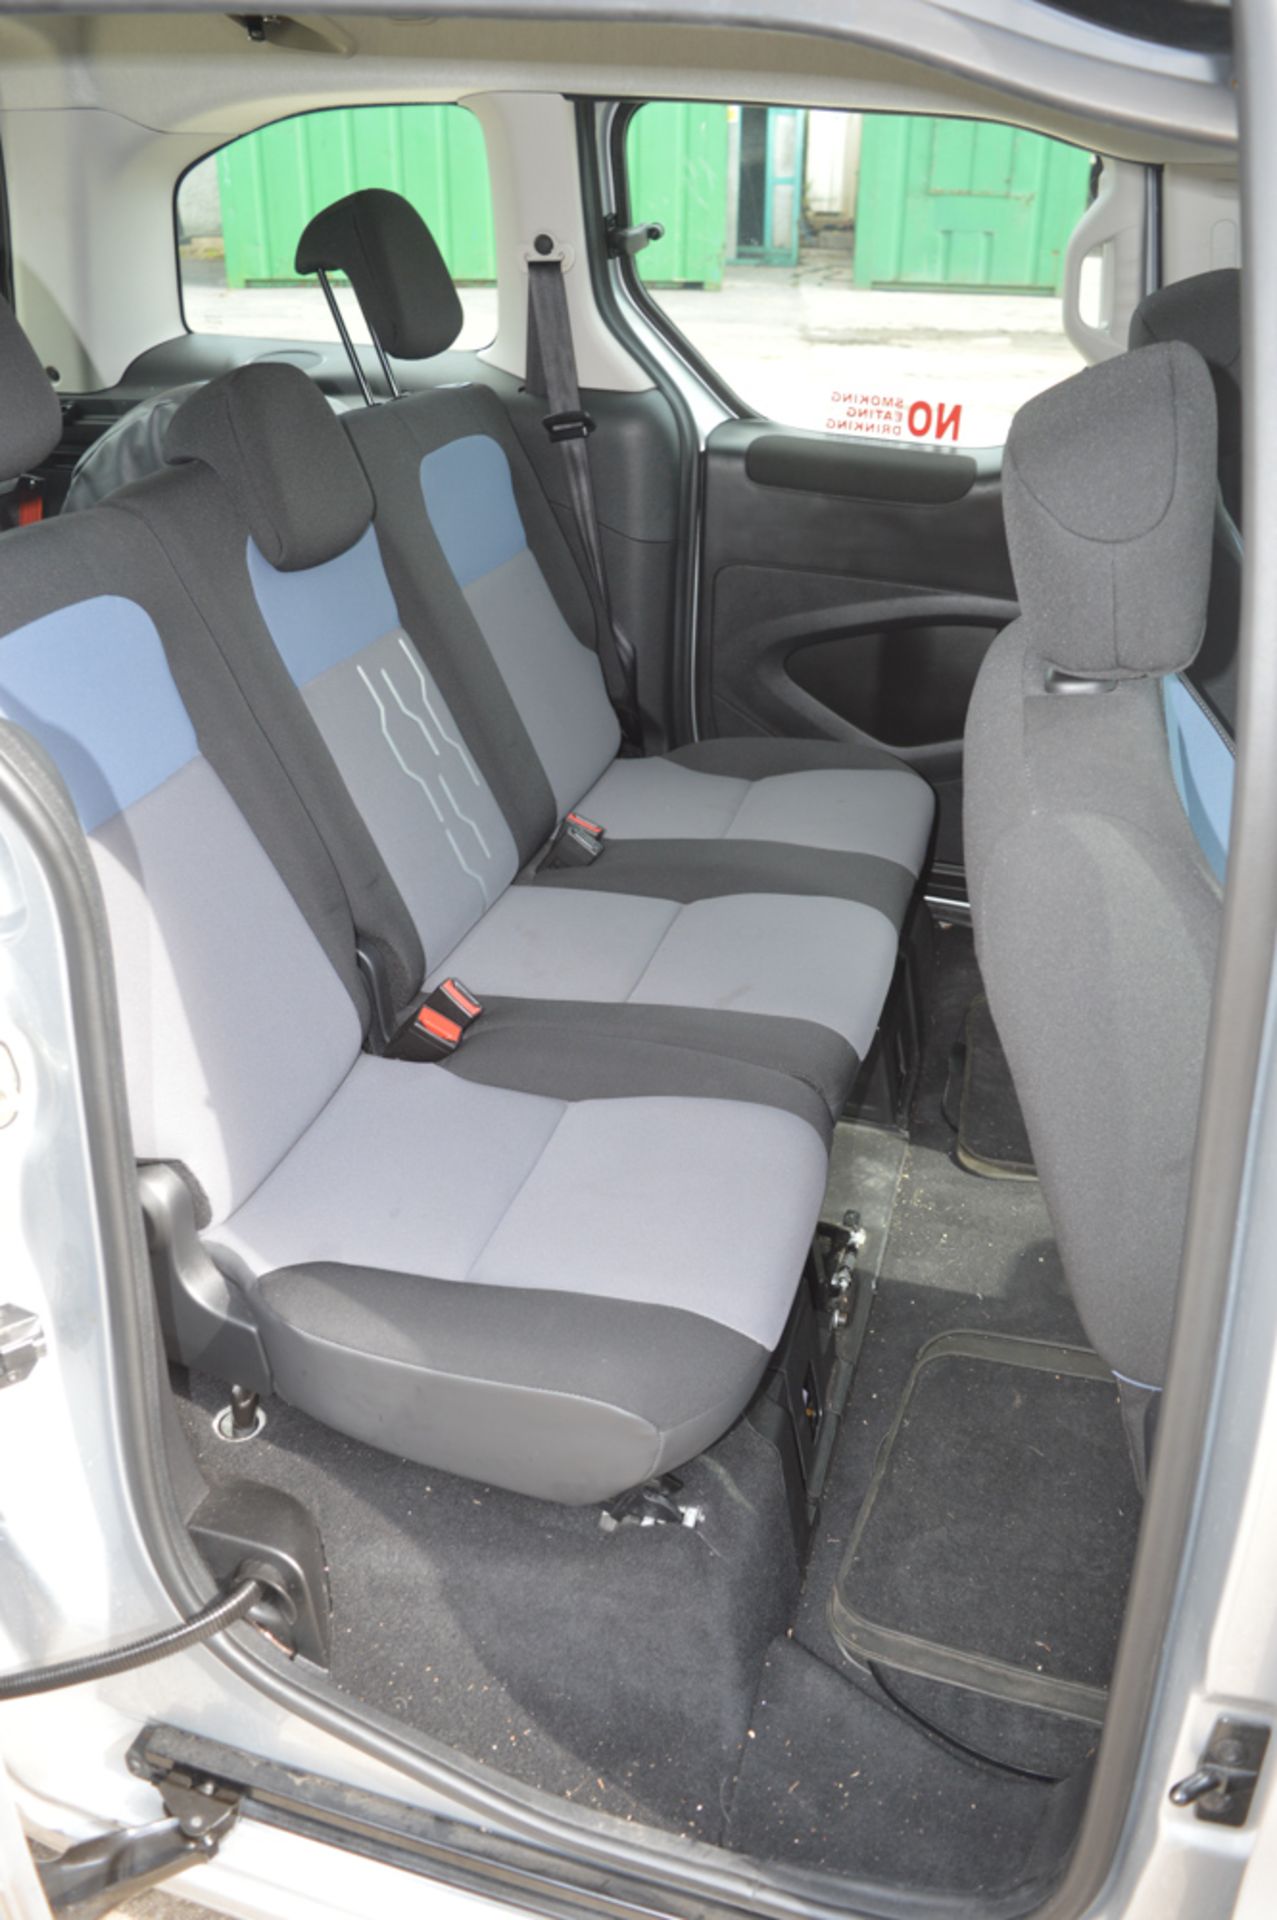 Peugeot Premier RS Blue HDI S/S 5 seat wheelchair access MPV Registration number: SF16 GFG Date of - Image 11 of 11